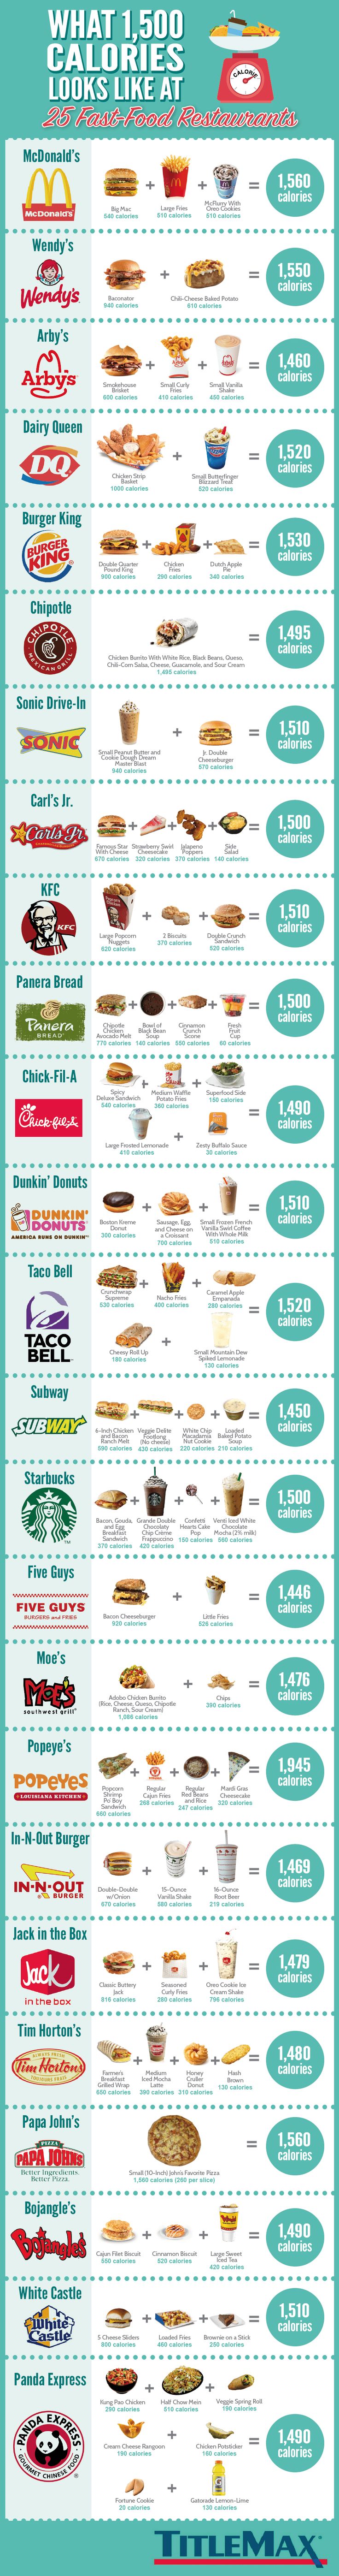 Data Chart : What 1,500 Calories Looks Like at 25 Fast Food Chains ...